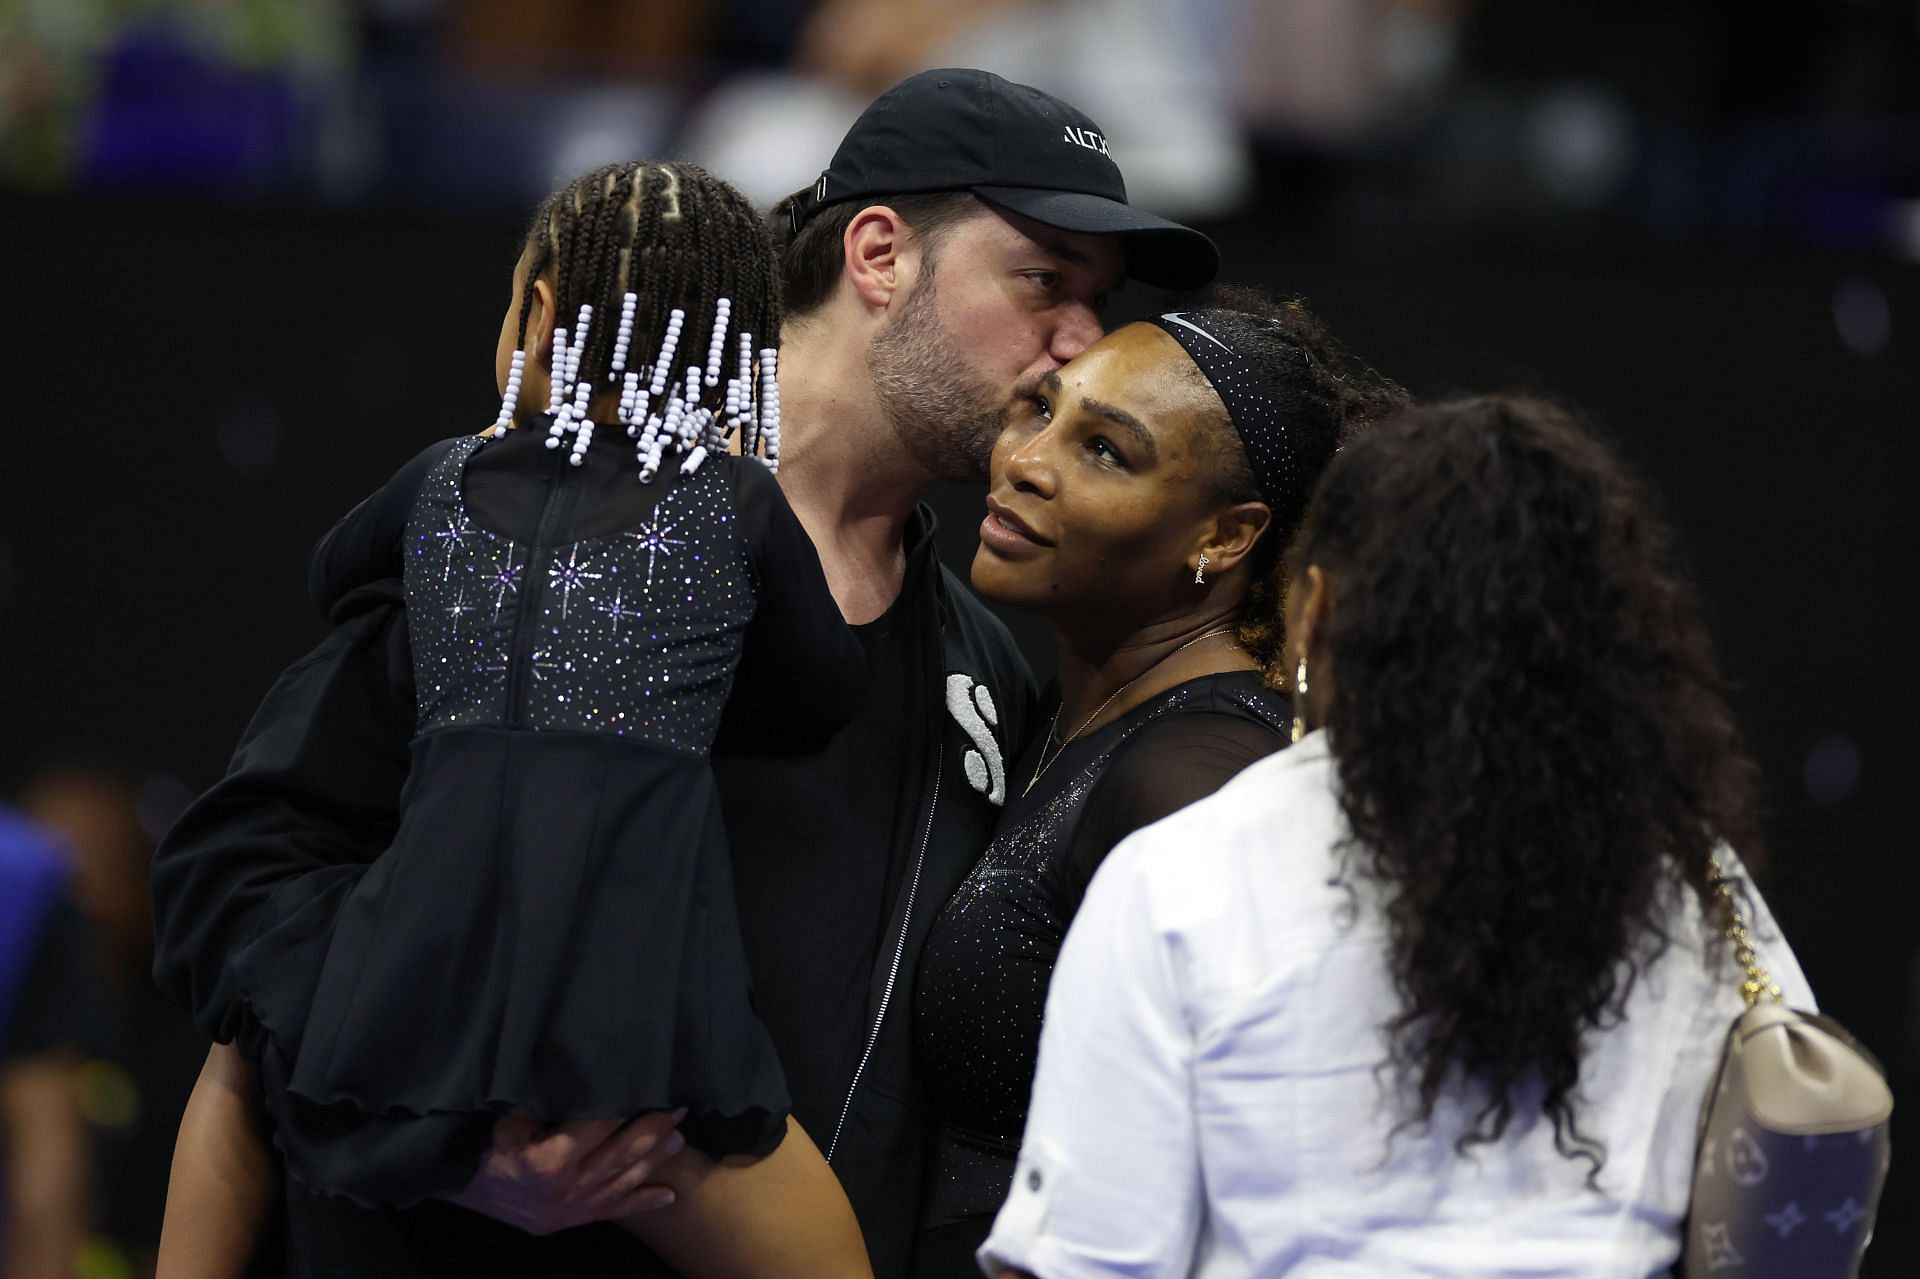 Olympia (L), Alexis Ohanian, and Serena Williams (R) at the 2022 US Open